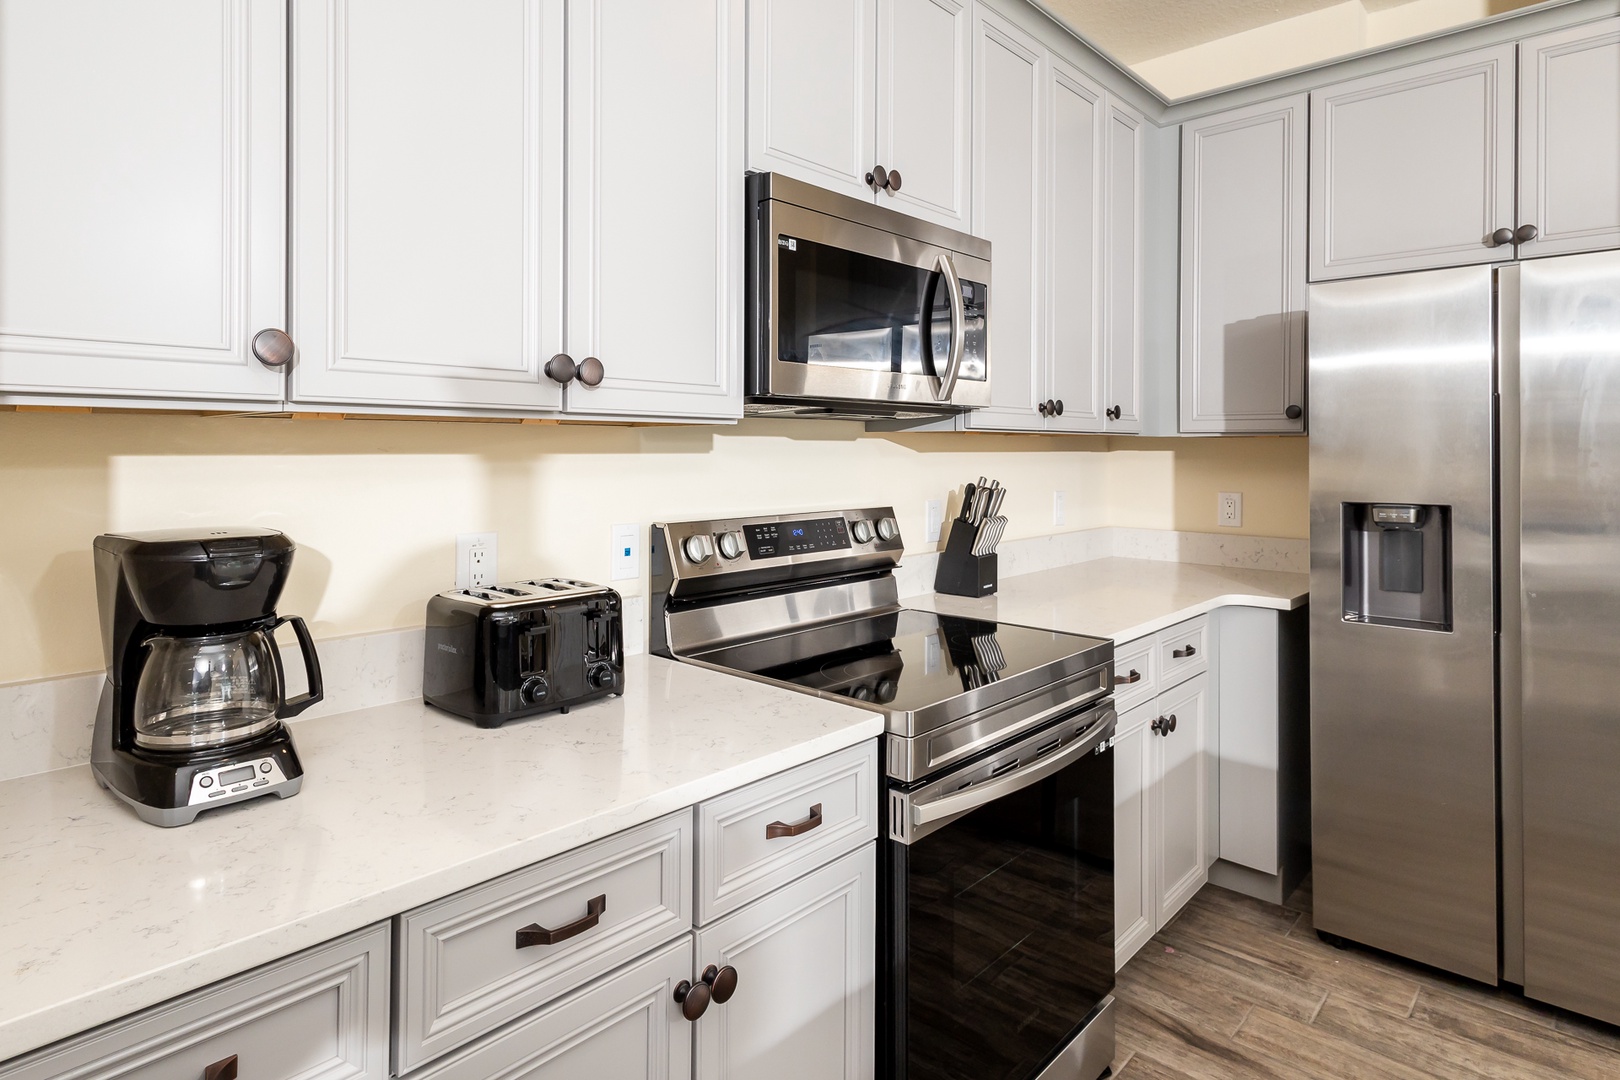 The sleek kitchen offers ample storage space & all the comforts of home